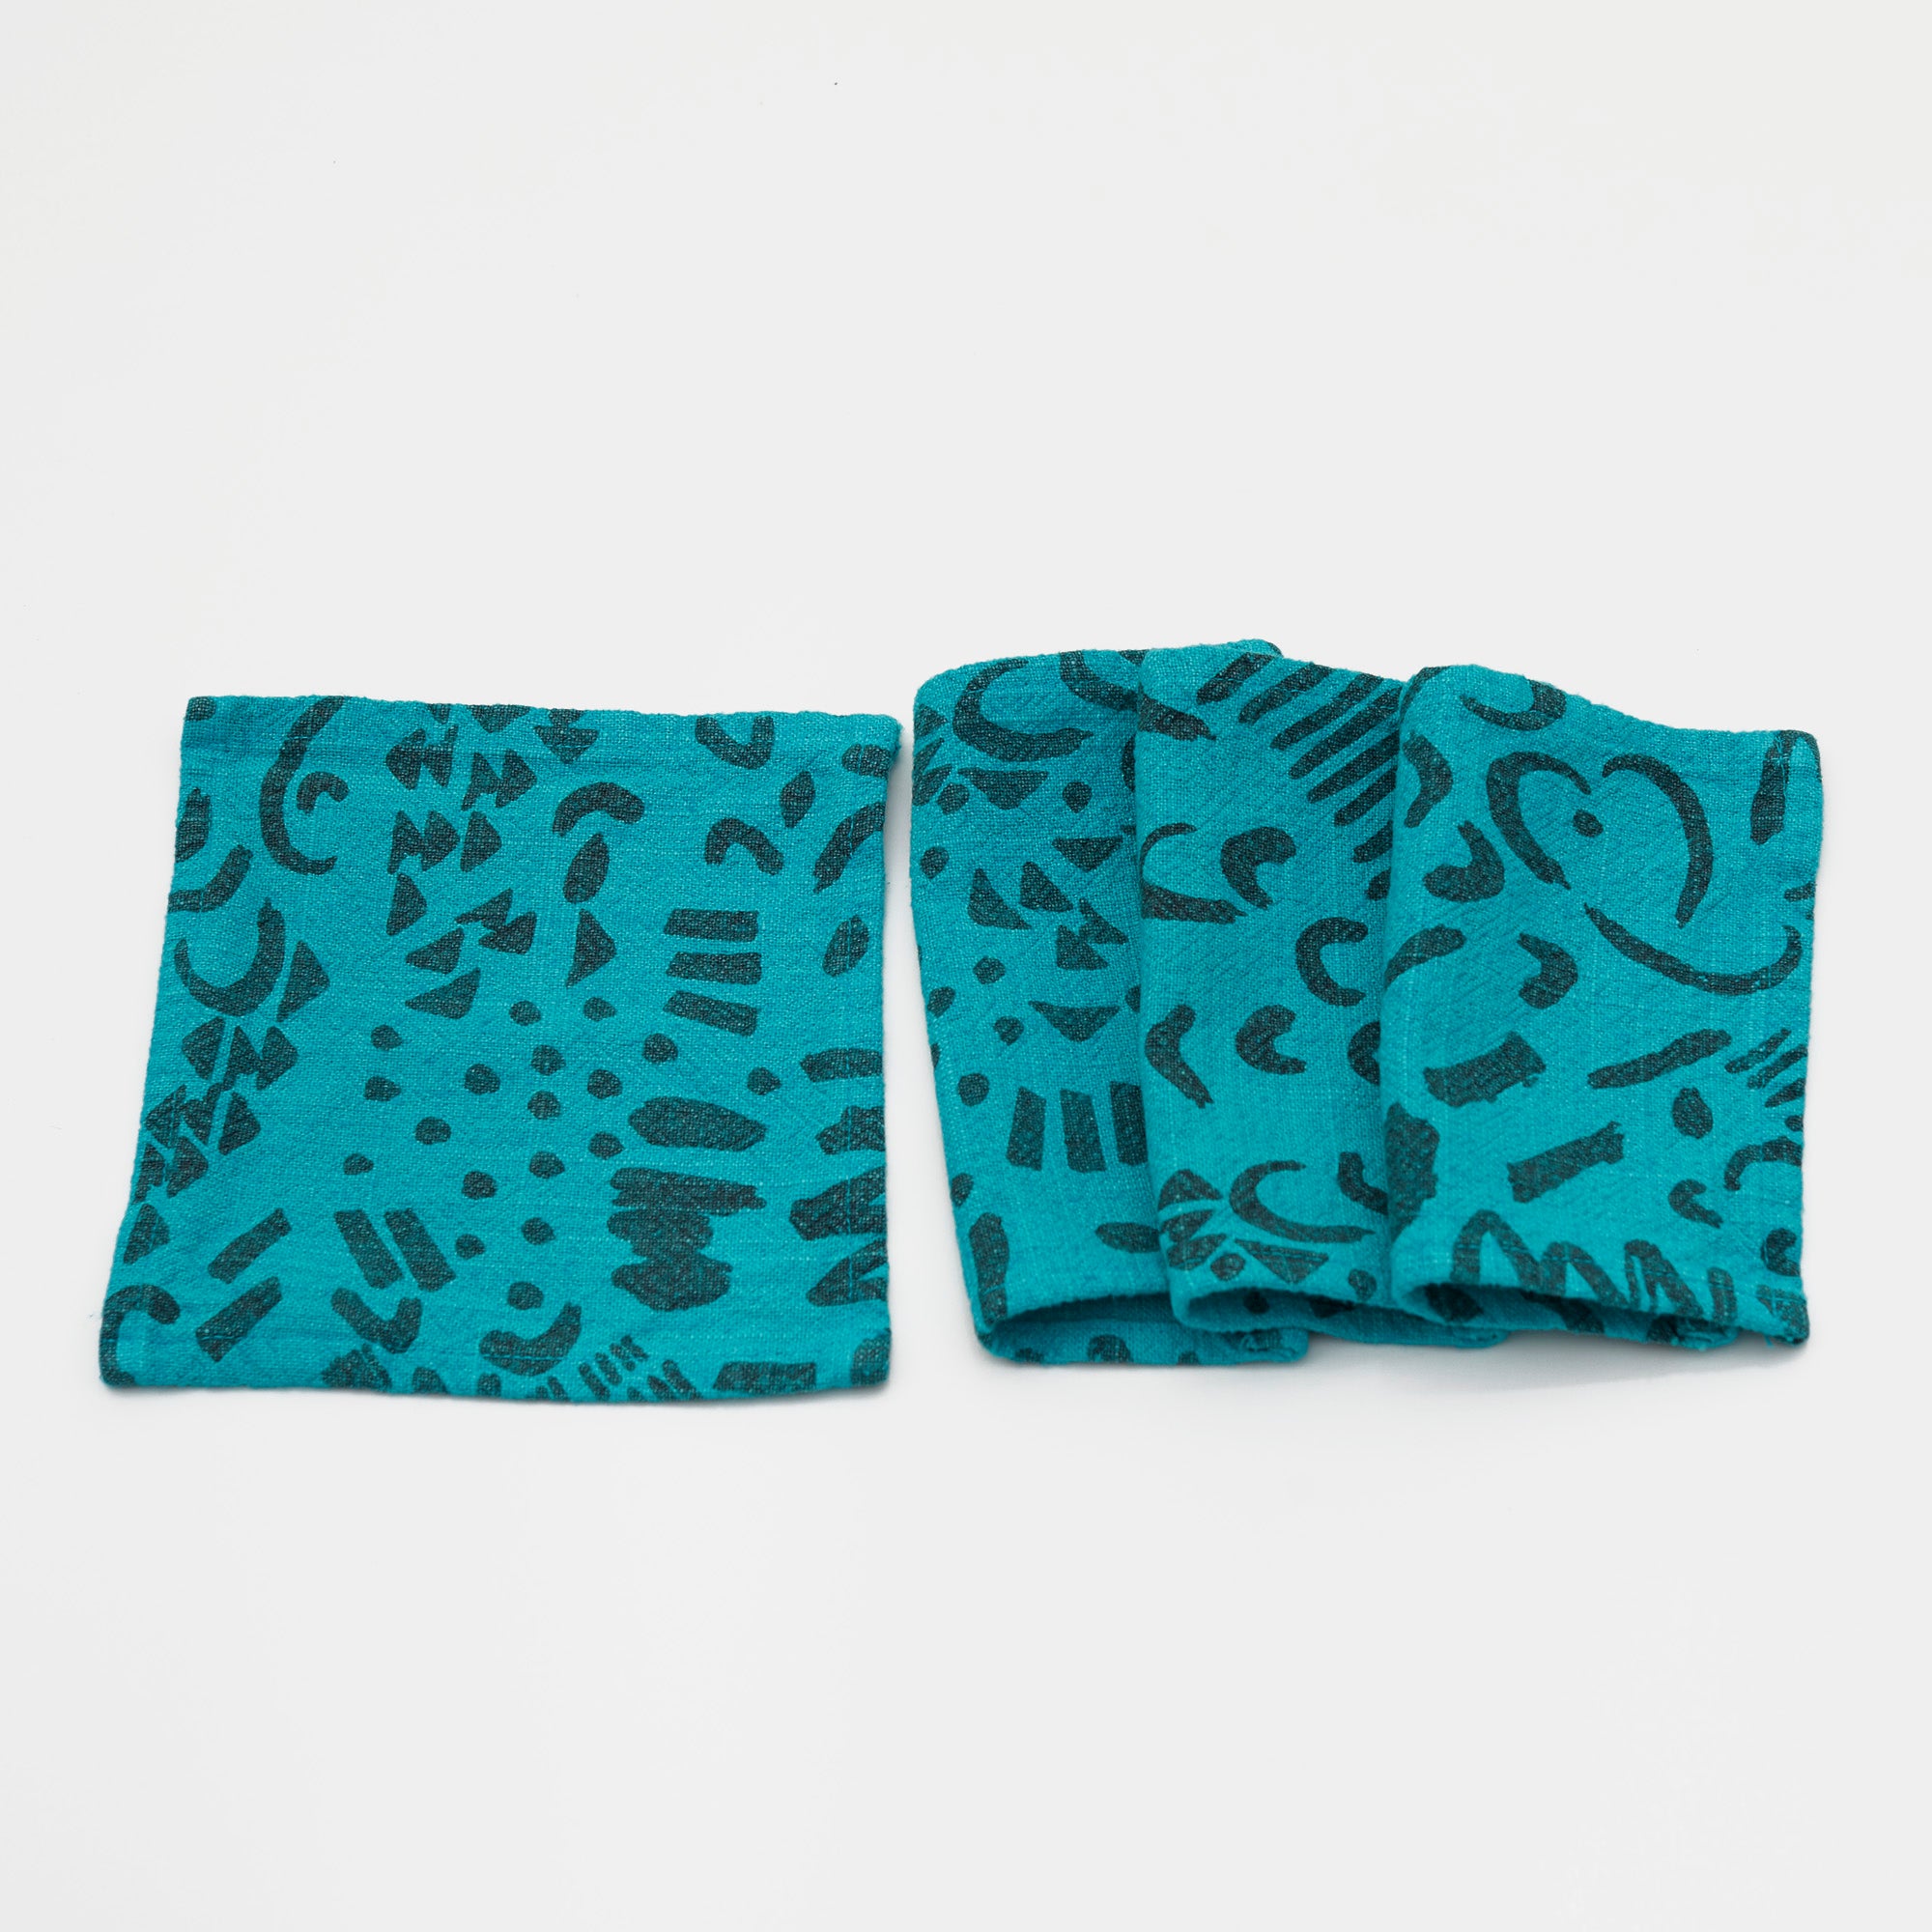 Little Napkins - Dashes & Moons - Charcoal - Turquoise